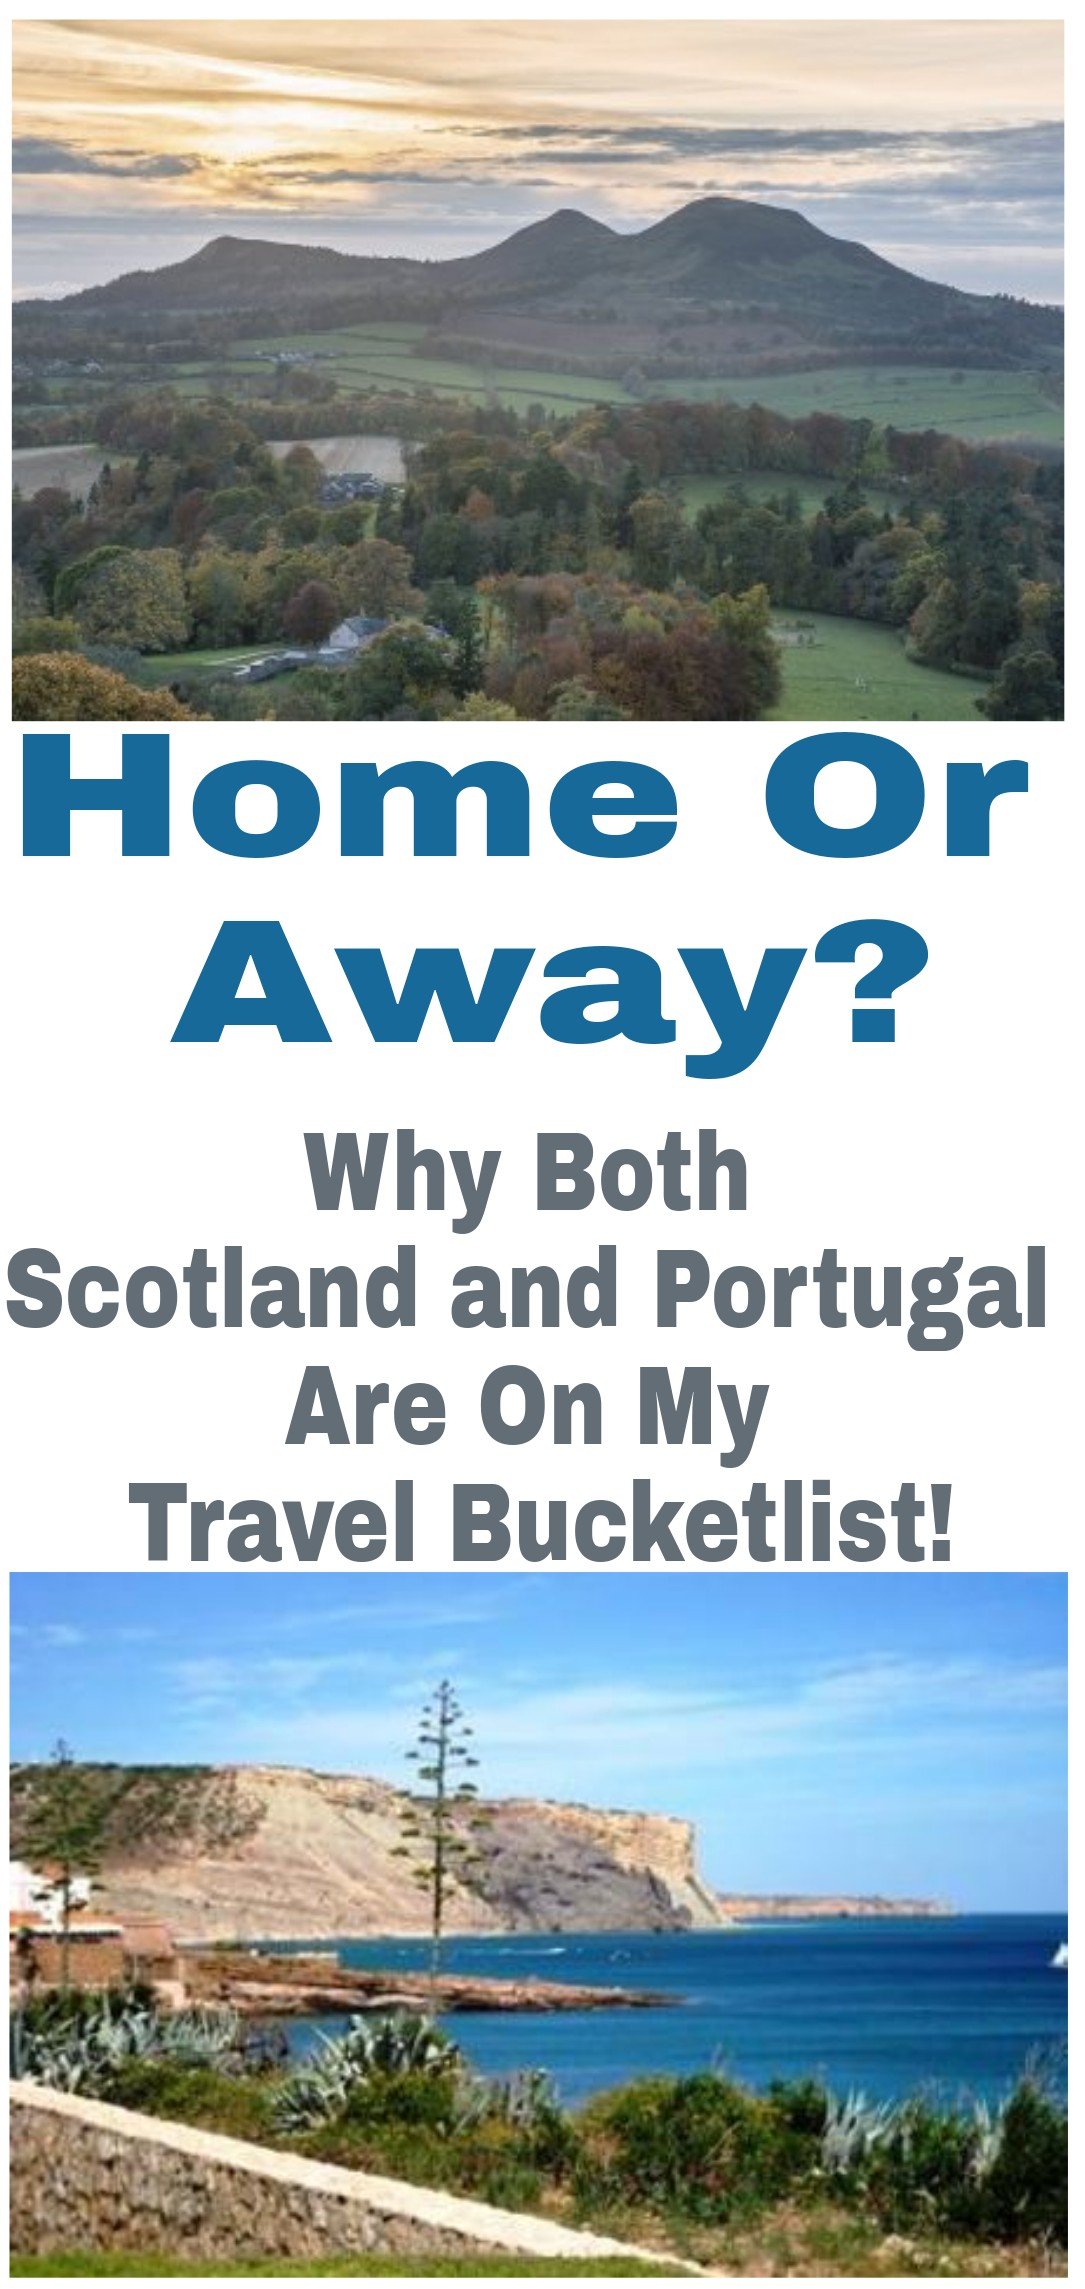 Home Or Away? Why Both Scotland And Portugal Are On My Travel Bucketlist! Image of Scotland and Portugal